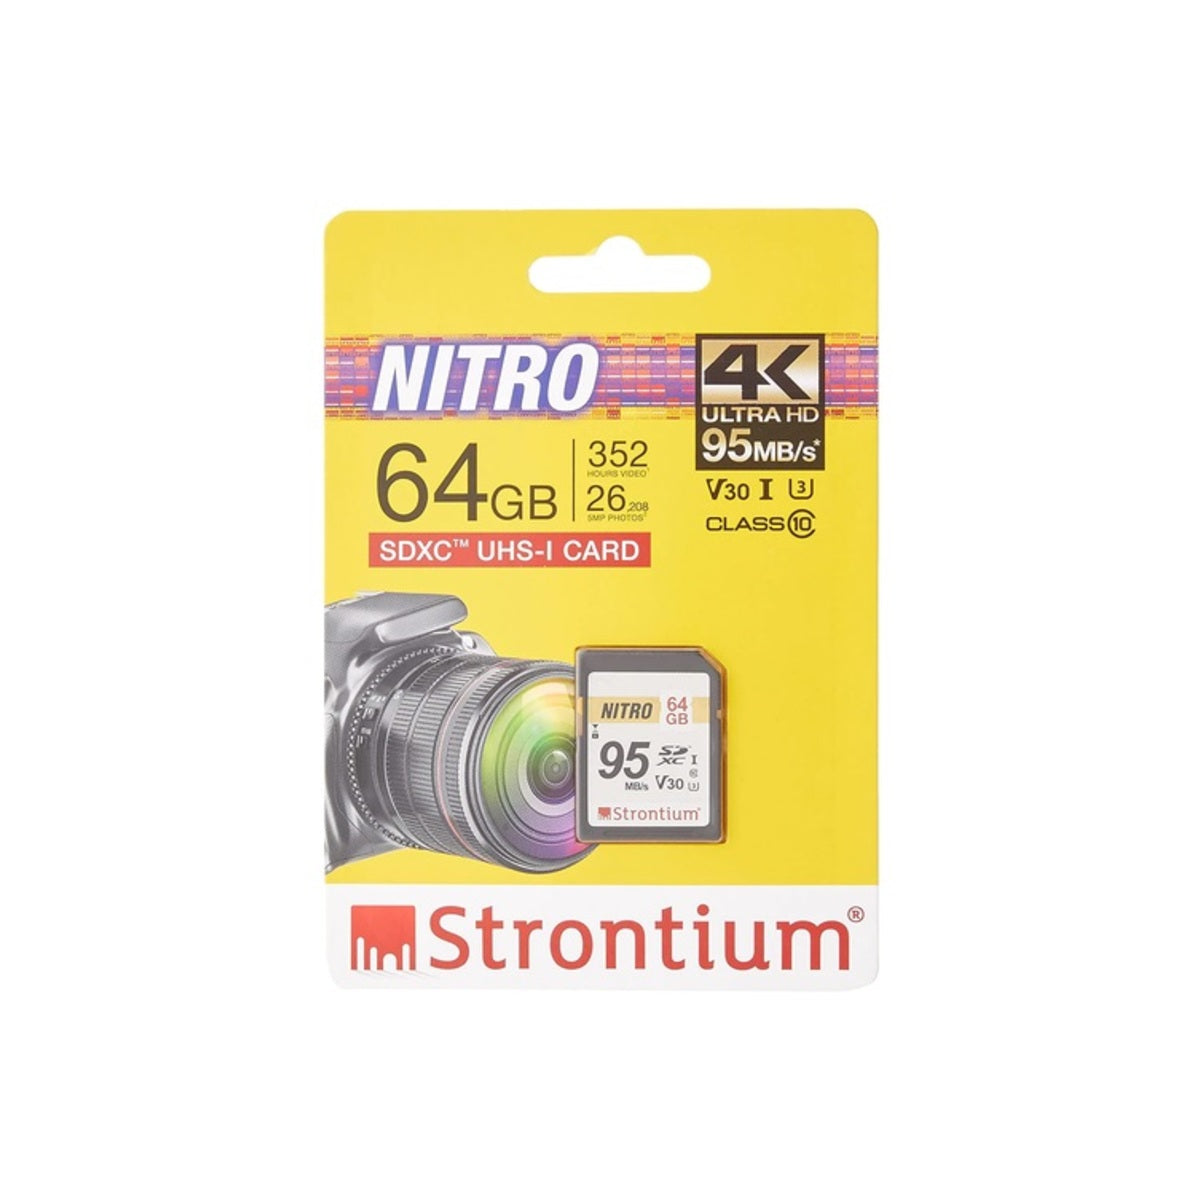 Strontium Nitro SD Card 95MB/s 64GB for Smartphones/Tablets/DSLRs